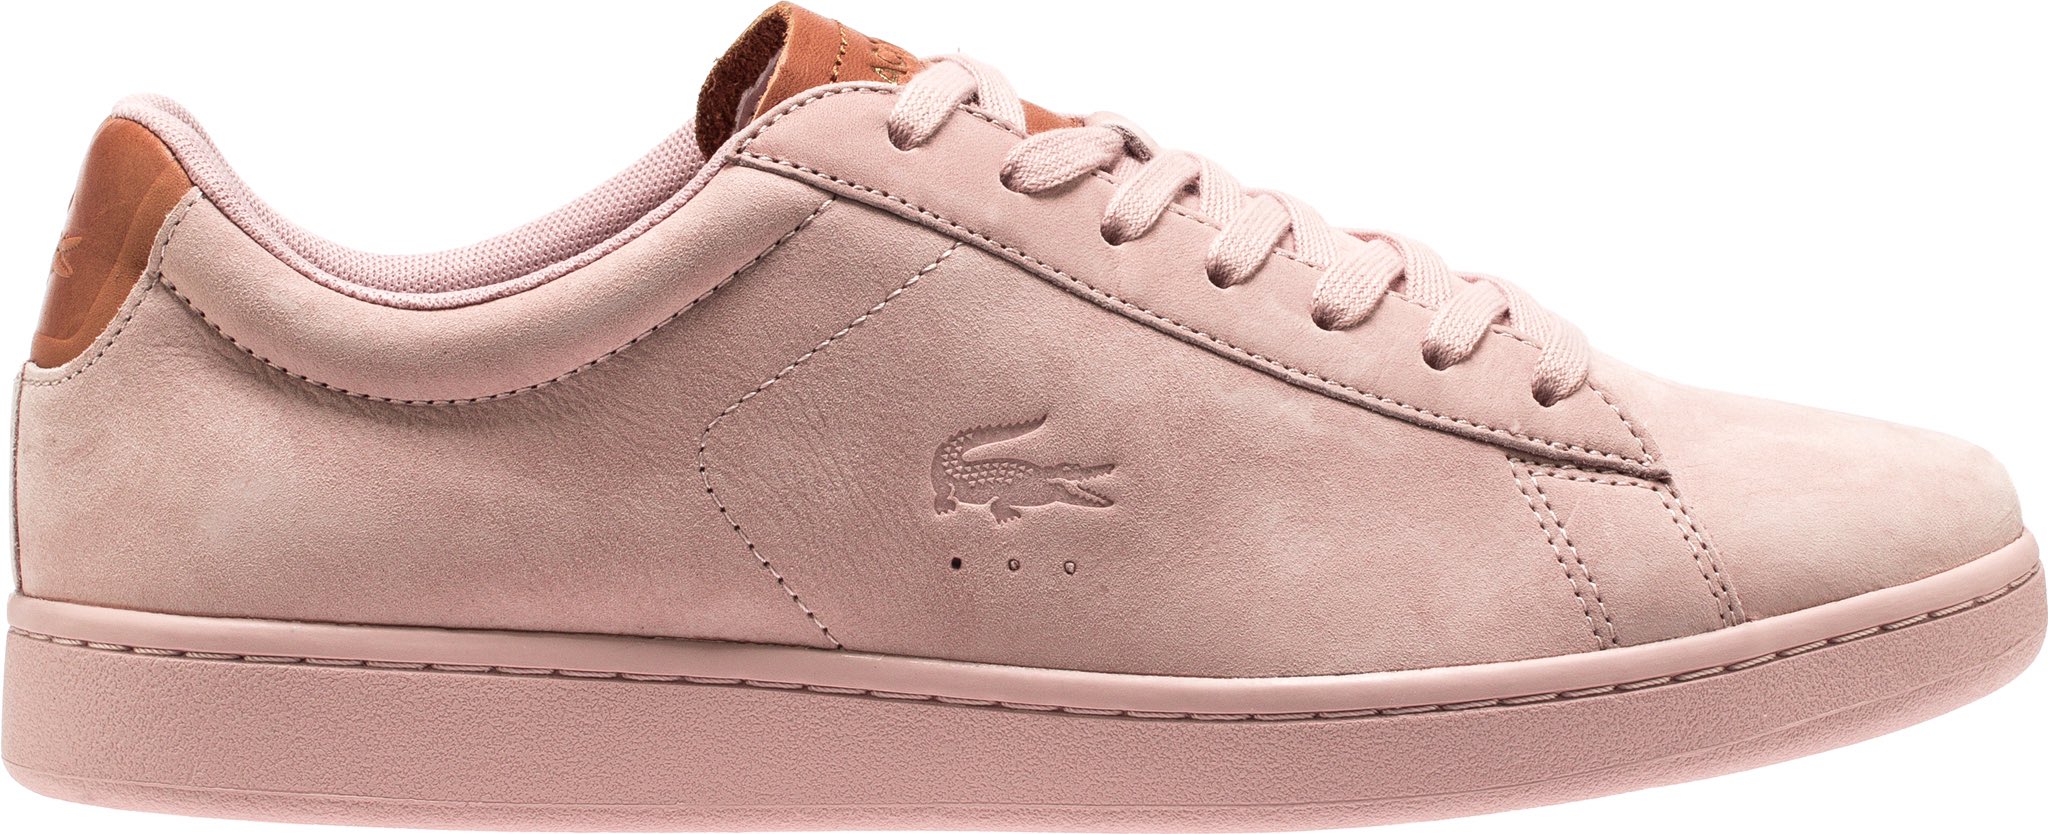 ShoePalace.com on Twitter: Carnaby Evo 317 9 Lifestyle ( Pink/Tan Brown) FREE SHIPPING!!! https://t.co/2yAlbcvPM0 https://t.co/px1Om2kDNQ" / Twitter